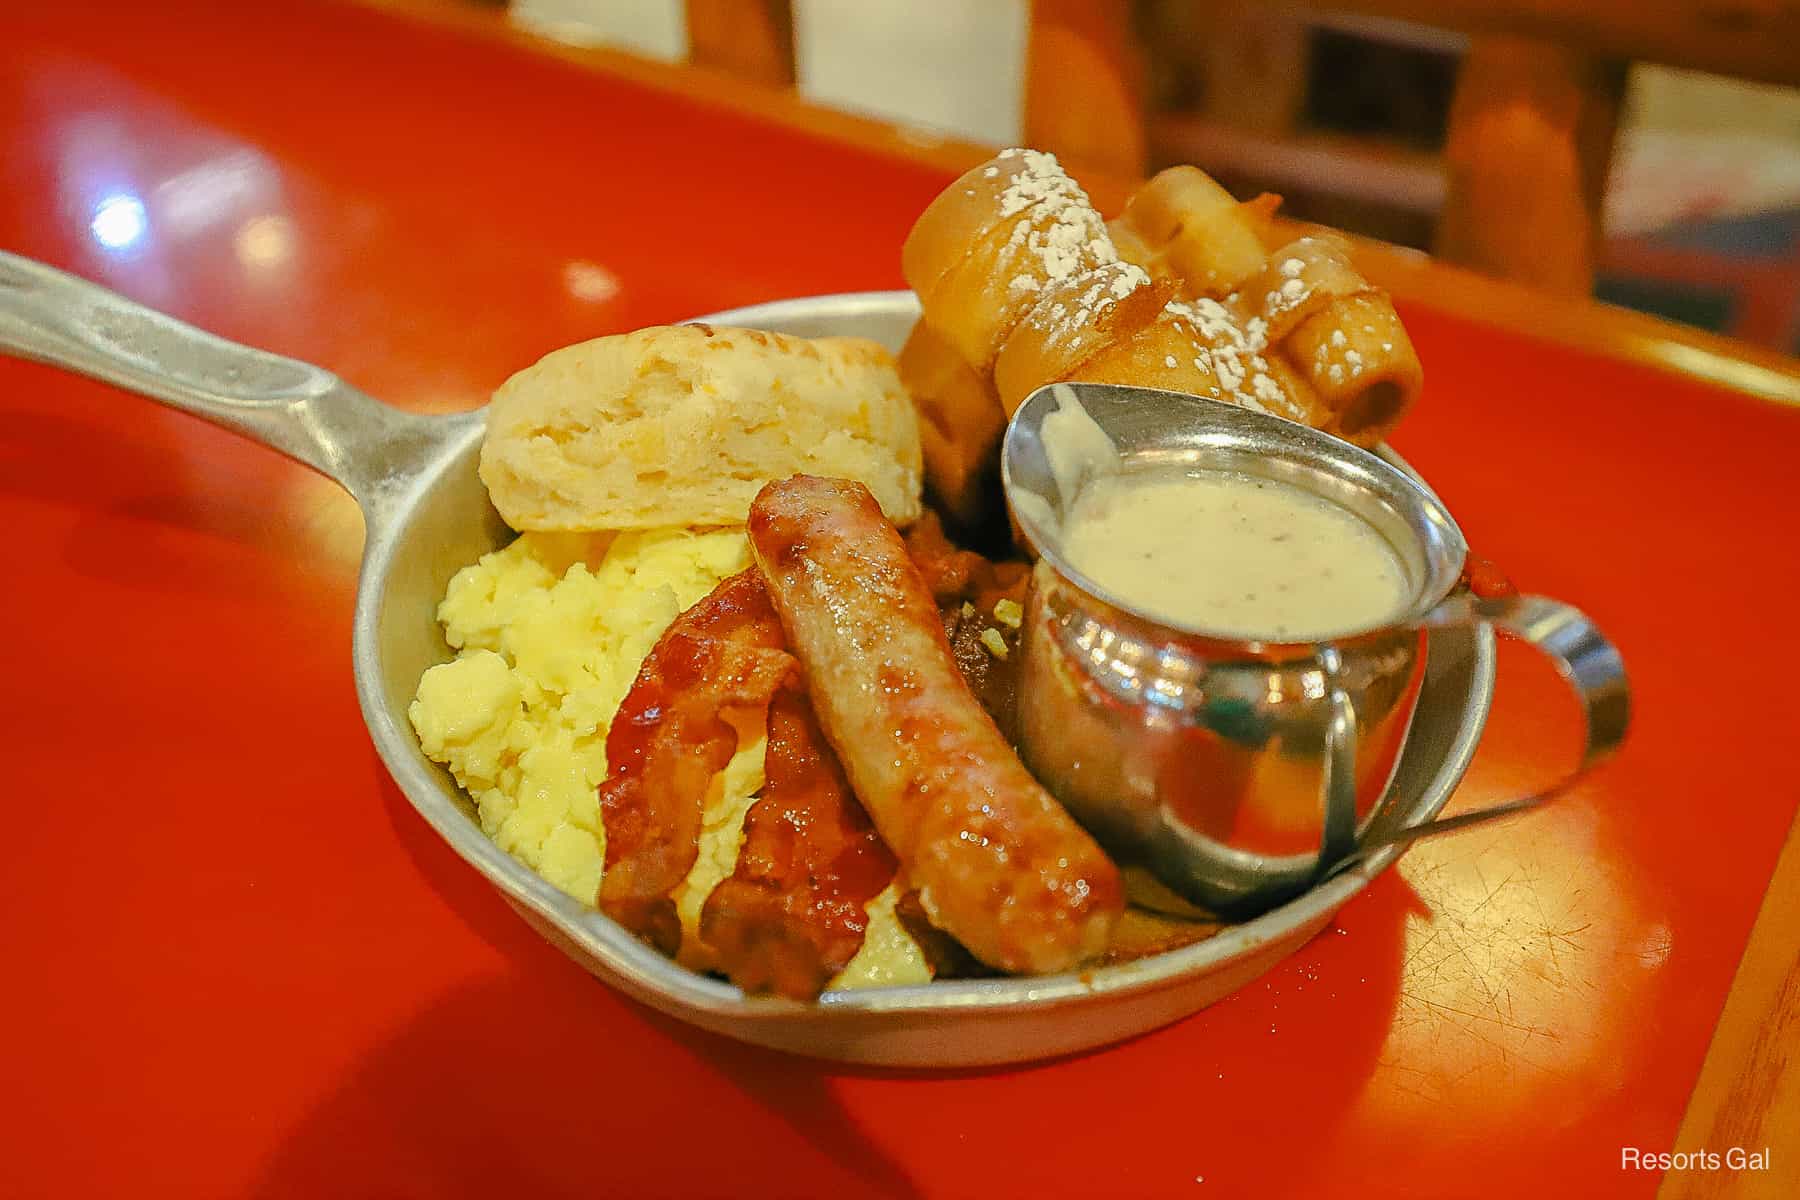 a breakfast skillet from Whispering Canyon Cafe 